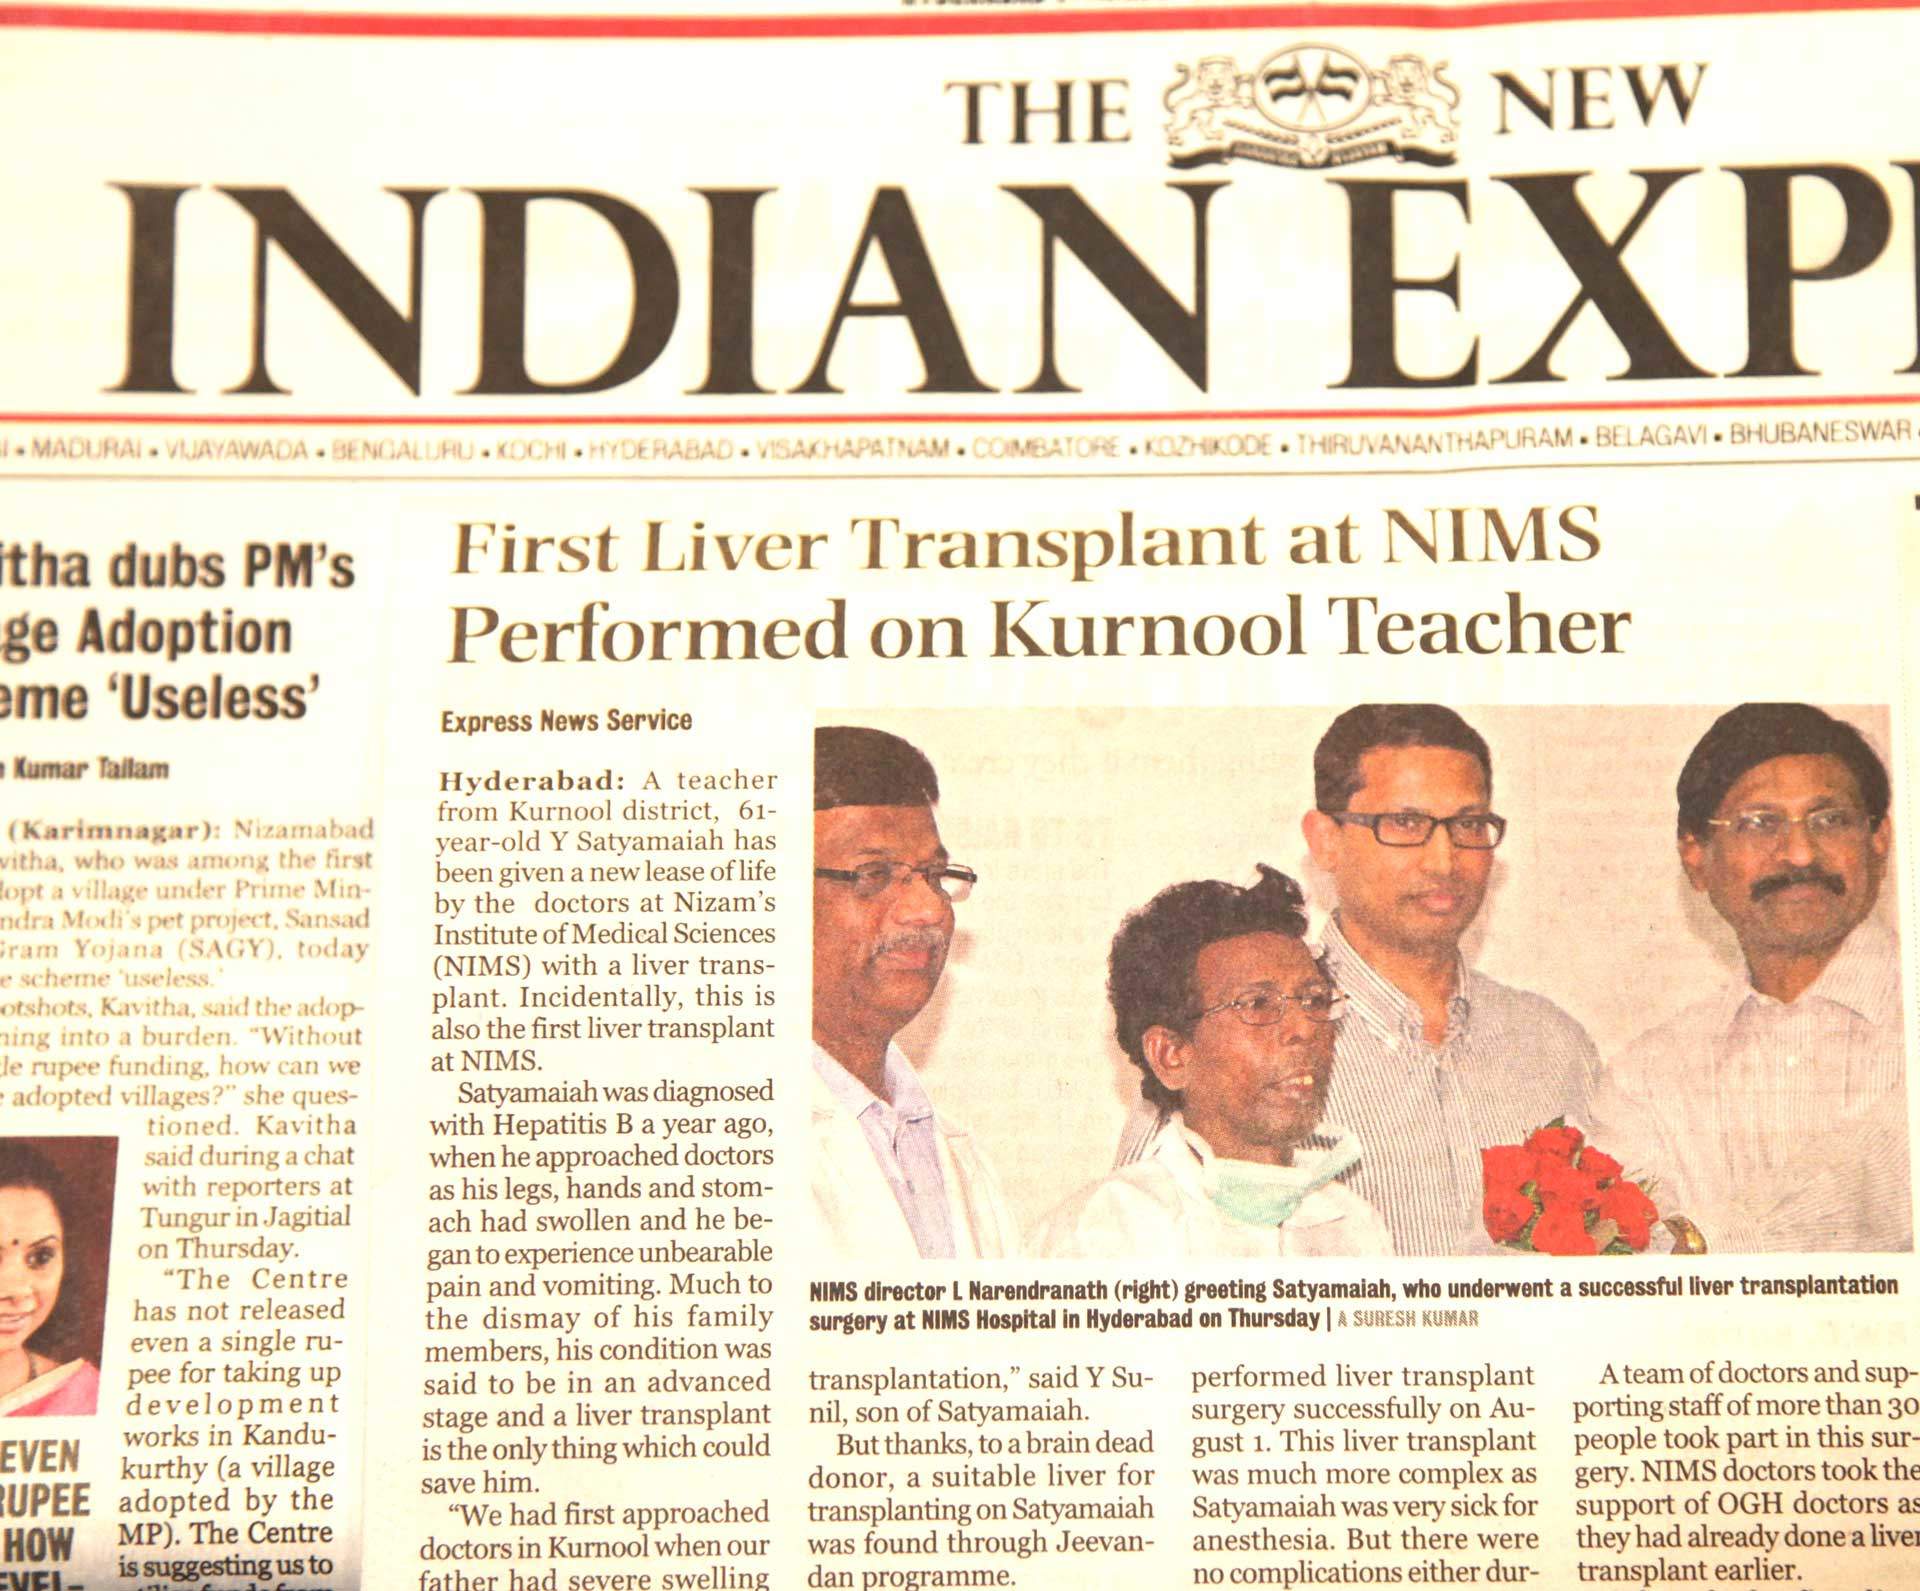 First Liver Transplant At NIMS Performed On Kurnool Teacher (The Indian Express)